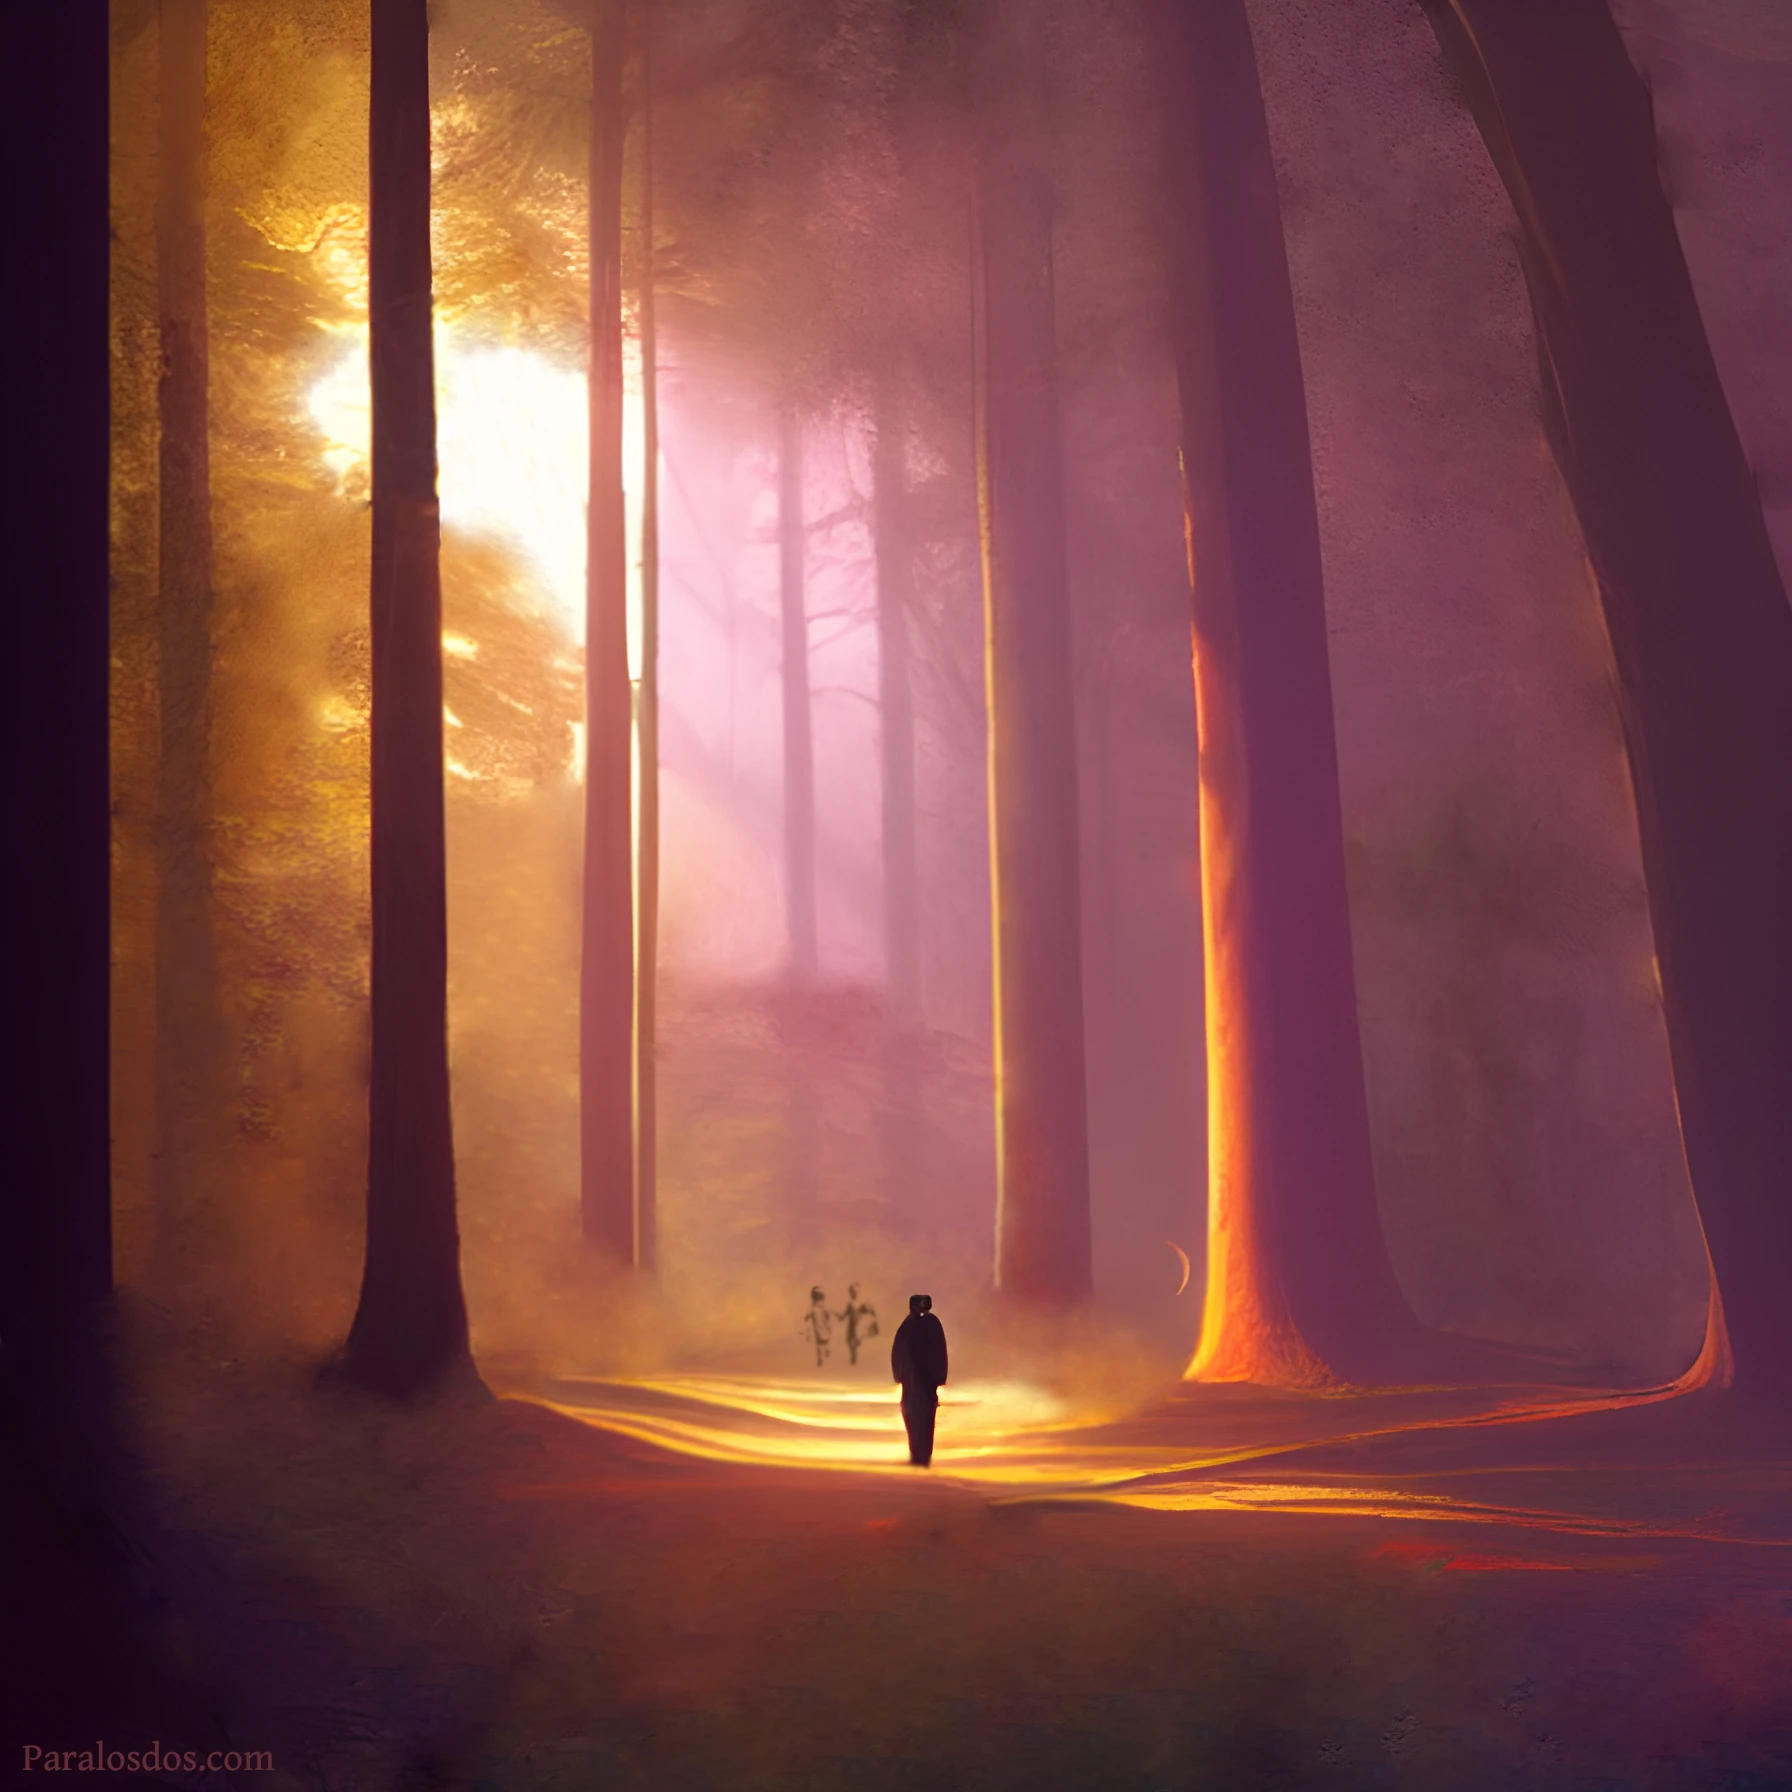 An artistic rendering of a figure walking towards the light in a forest of very tall trees.